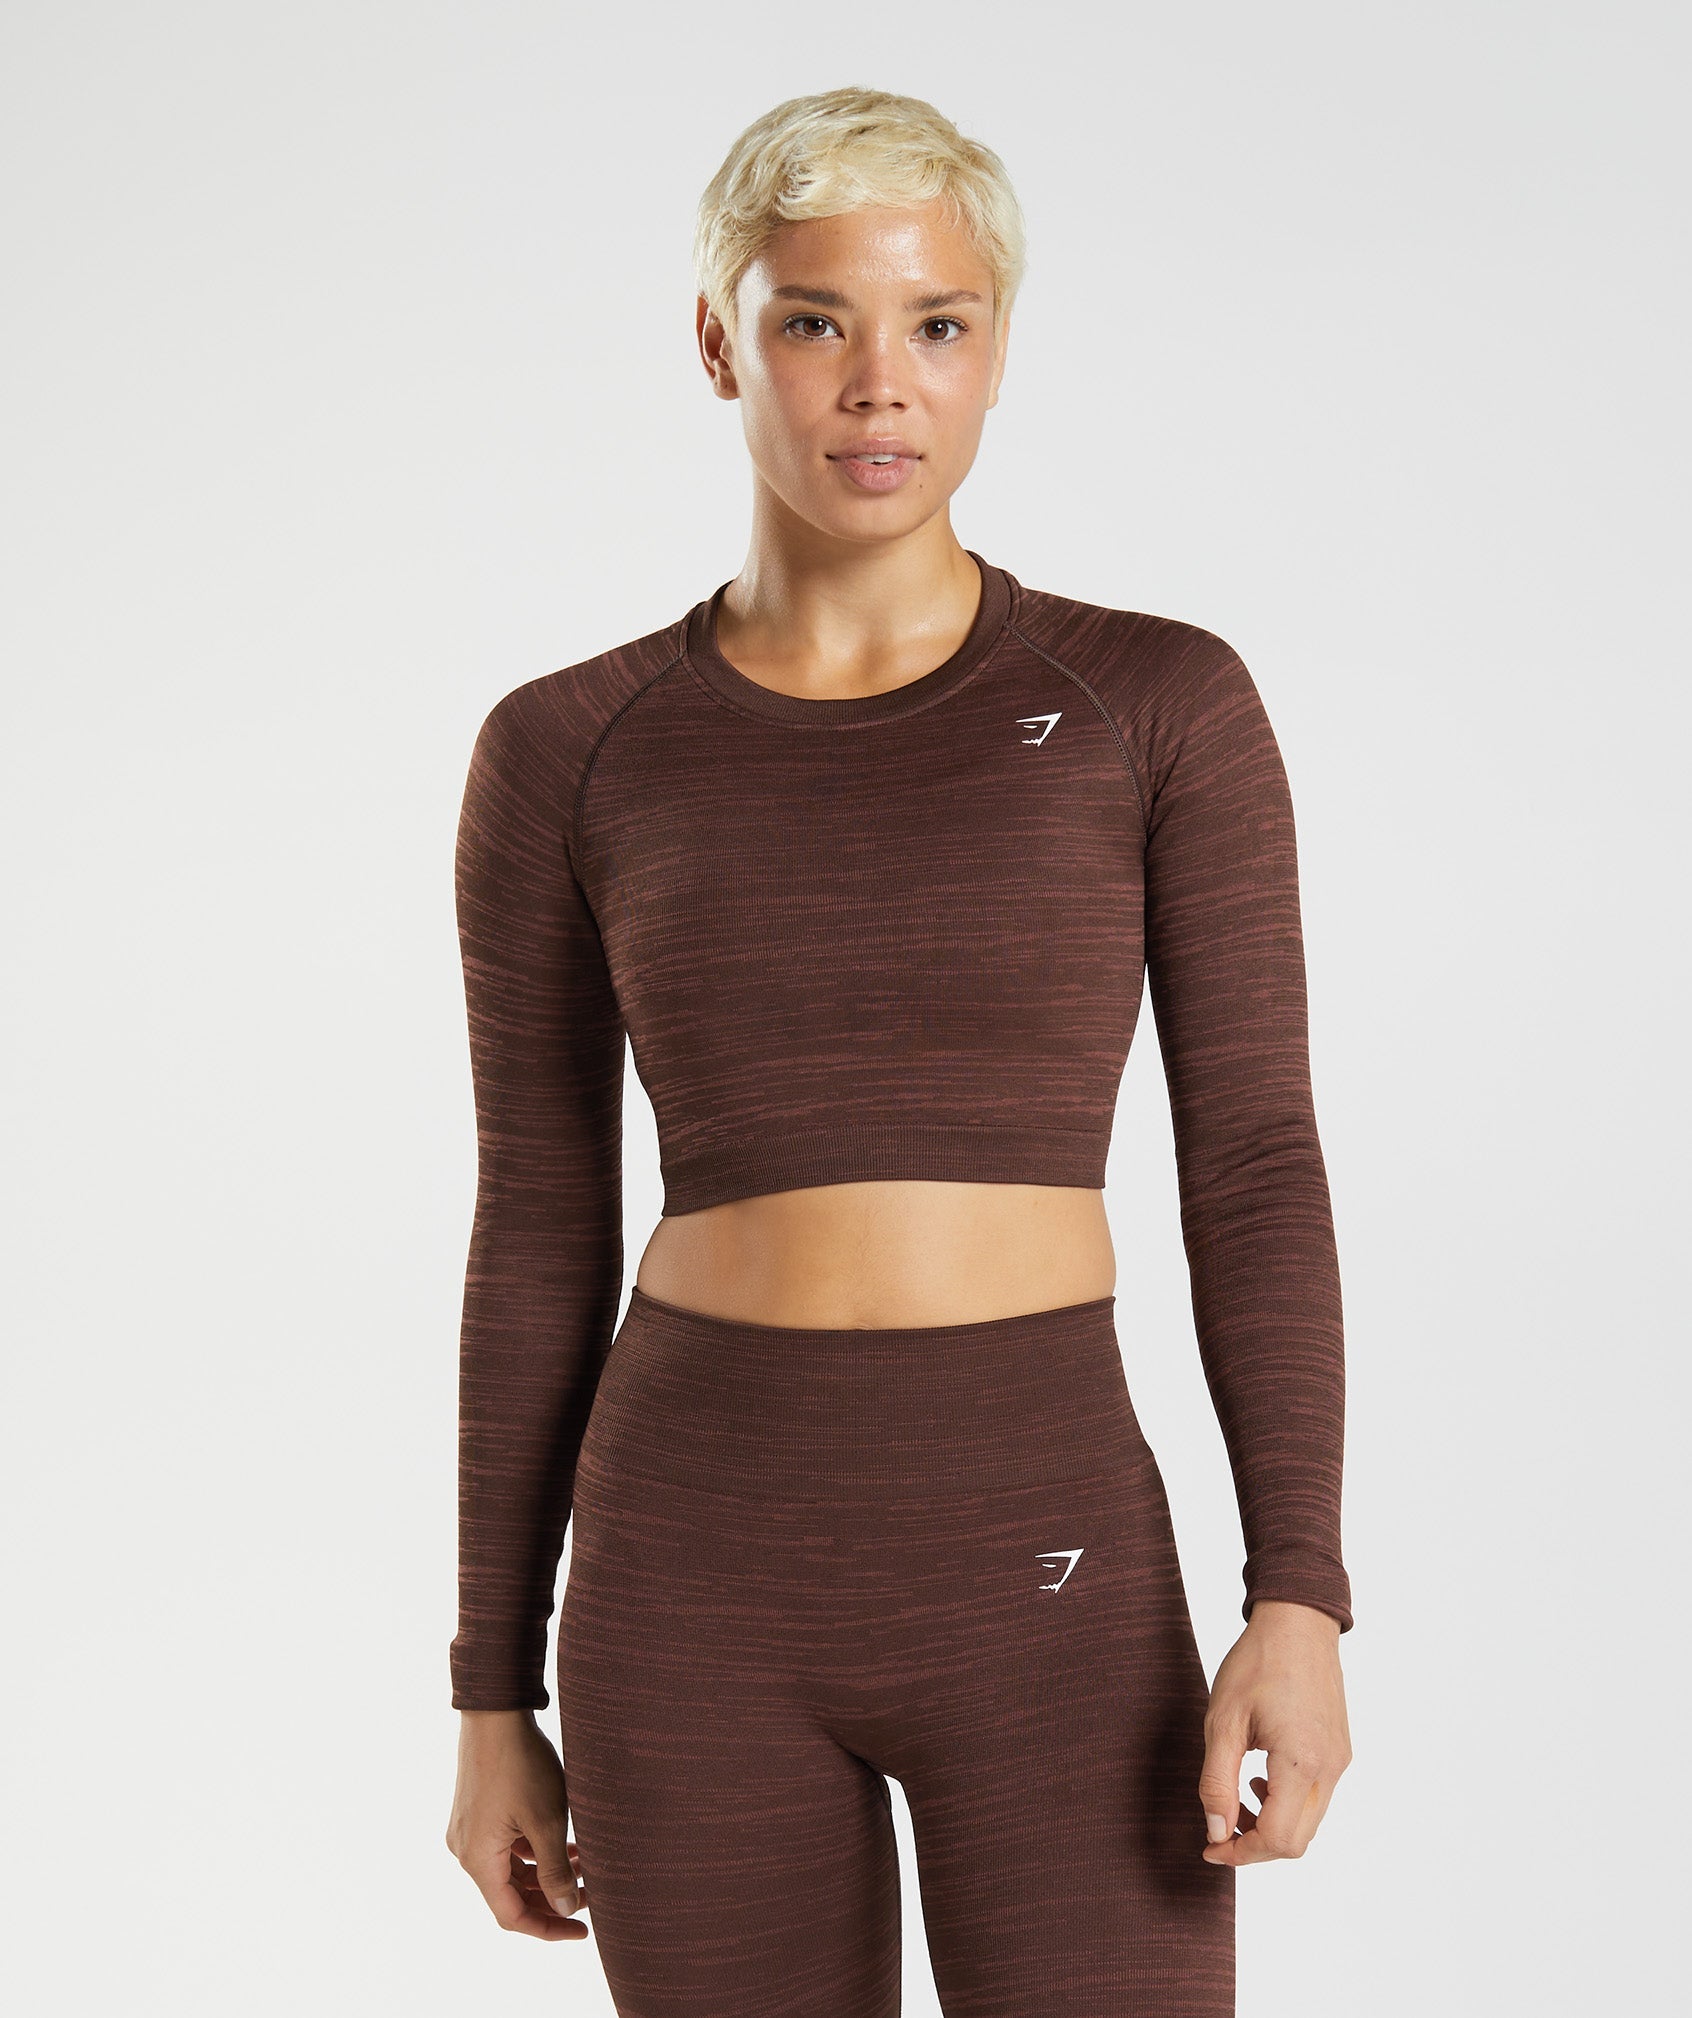 GYMSHARK Slounge Crop Top - Charcoal Marl - Small